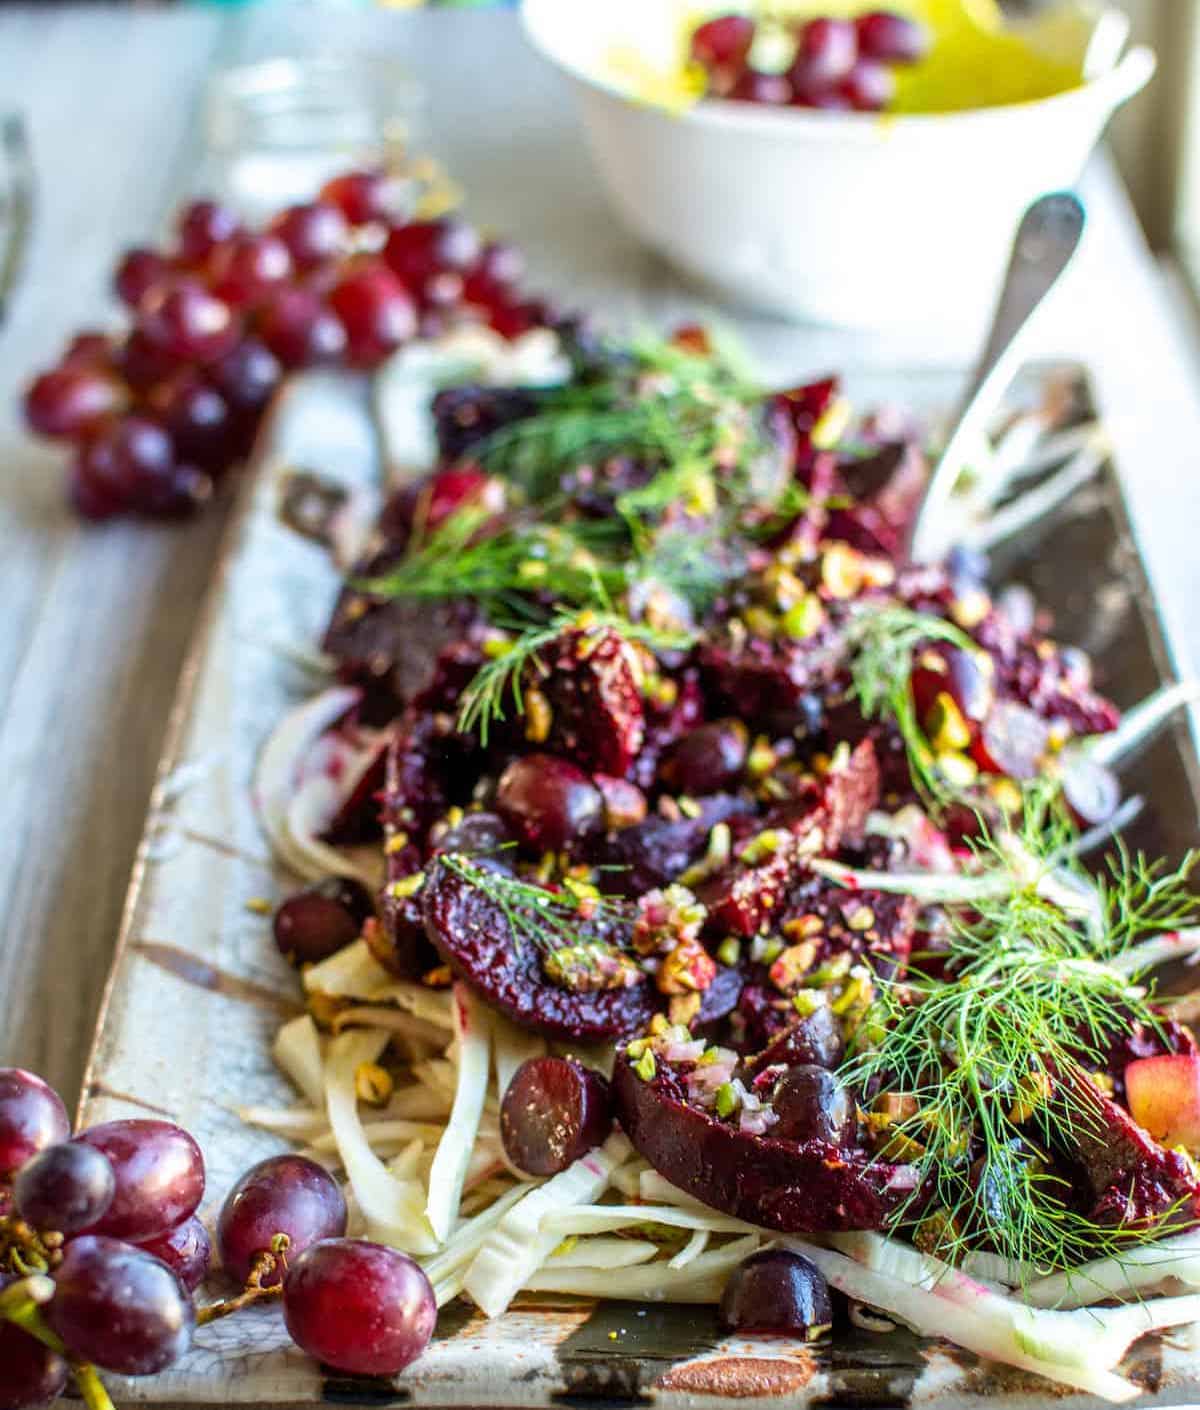 A platter of bright red Grape-Roasted Beet Salad drizzled with Serrano Pepper Dressing.